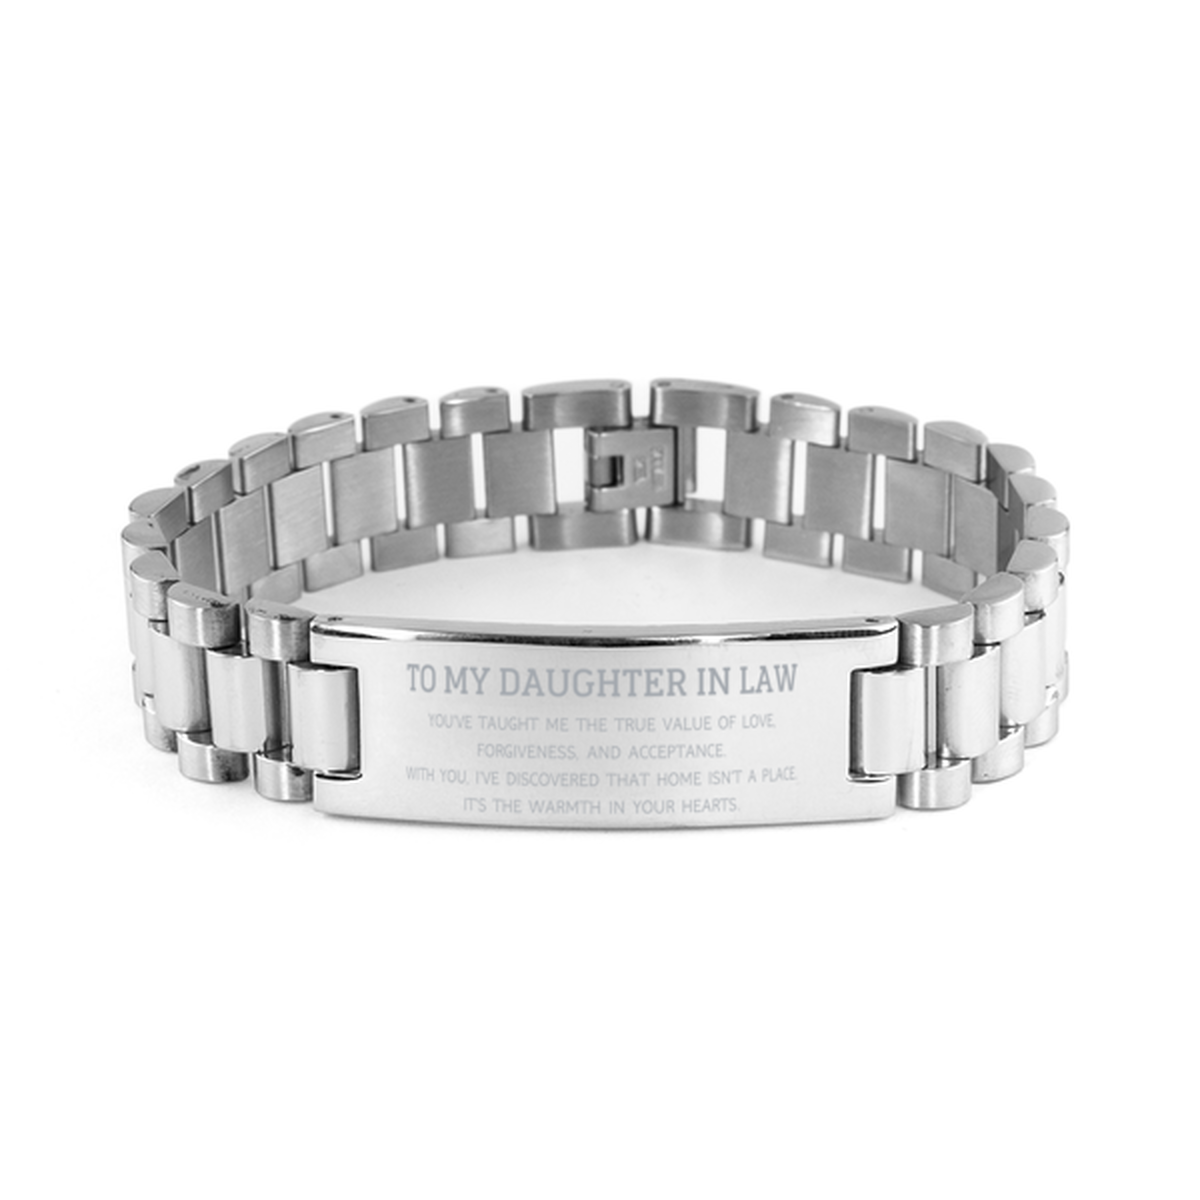 To My Daughter In Law Gifts, You've taught me the true value of love, Thank You Gifts For Daughter In Law, Birthday Ladder Stainless Steel Bracelet For Daughter In Law